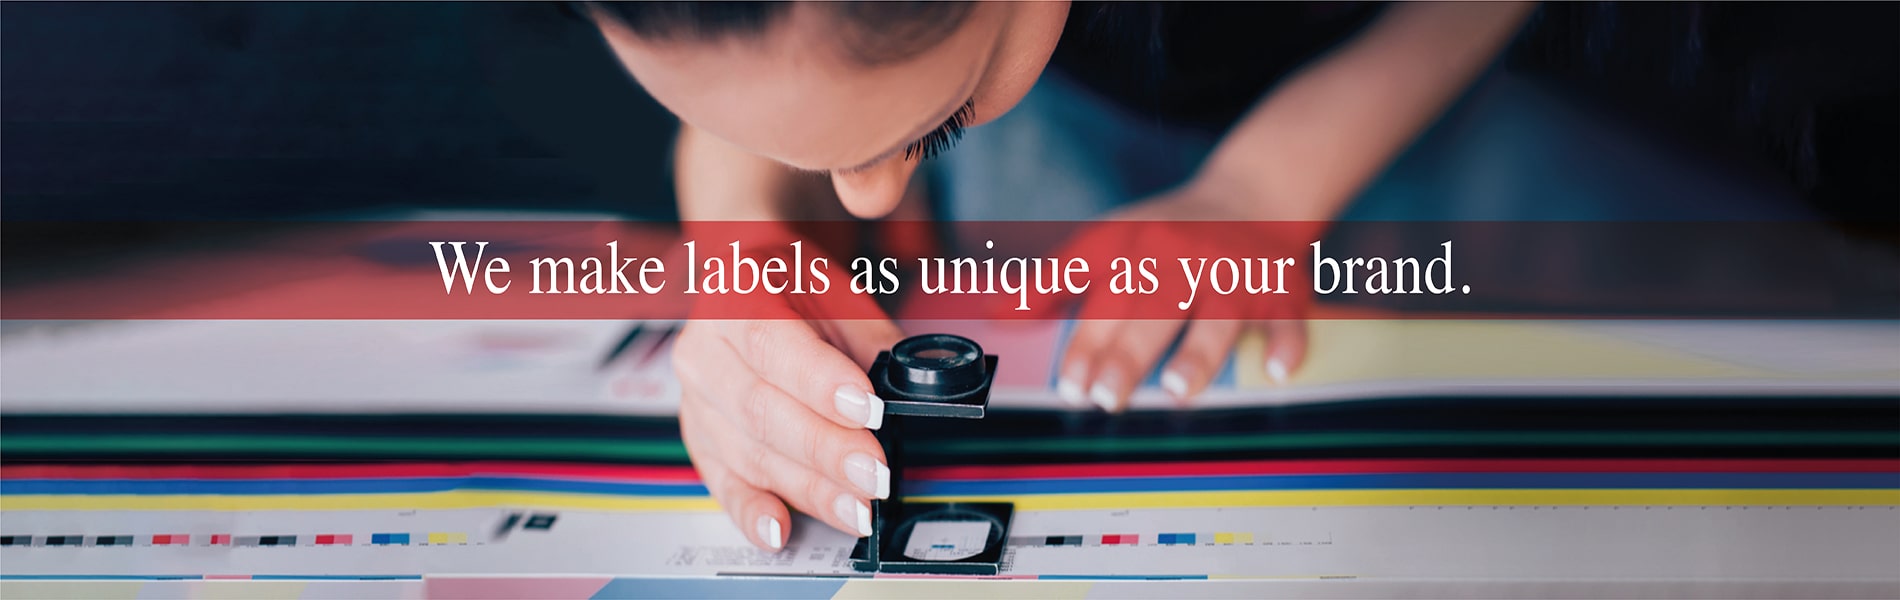 We make labels as unique as your brand!